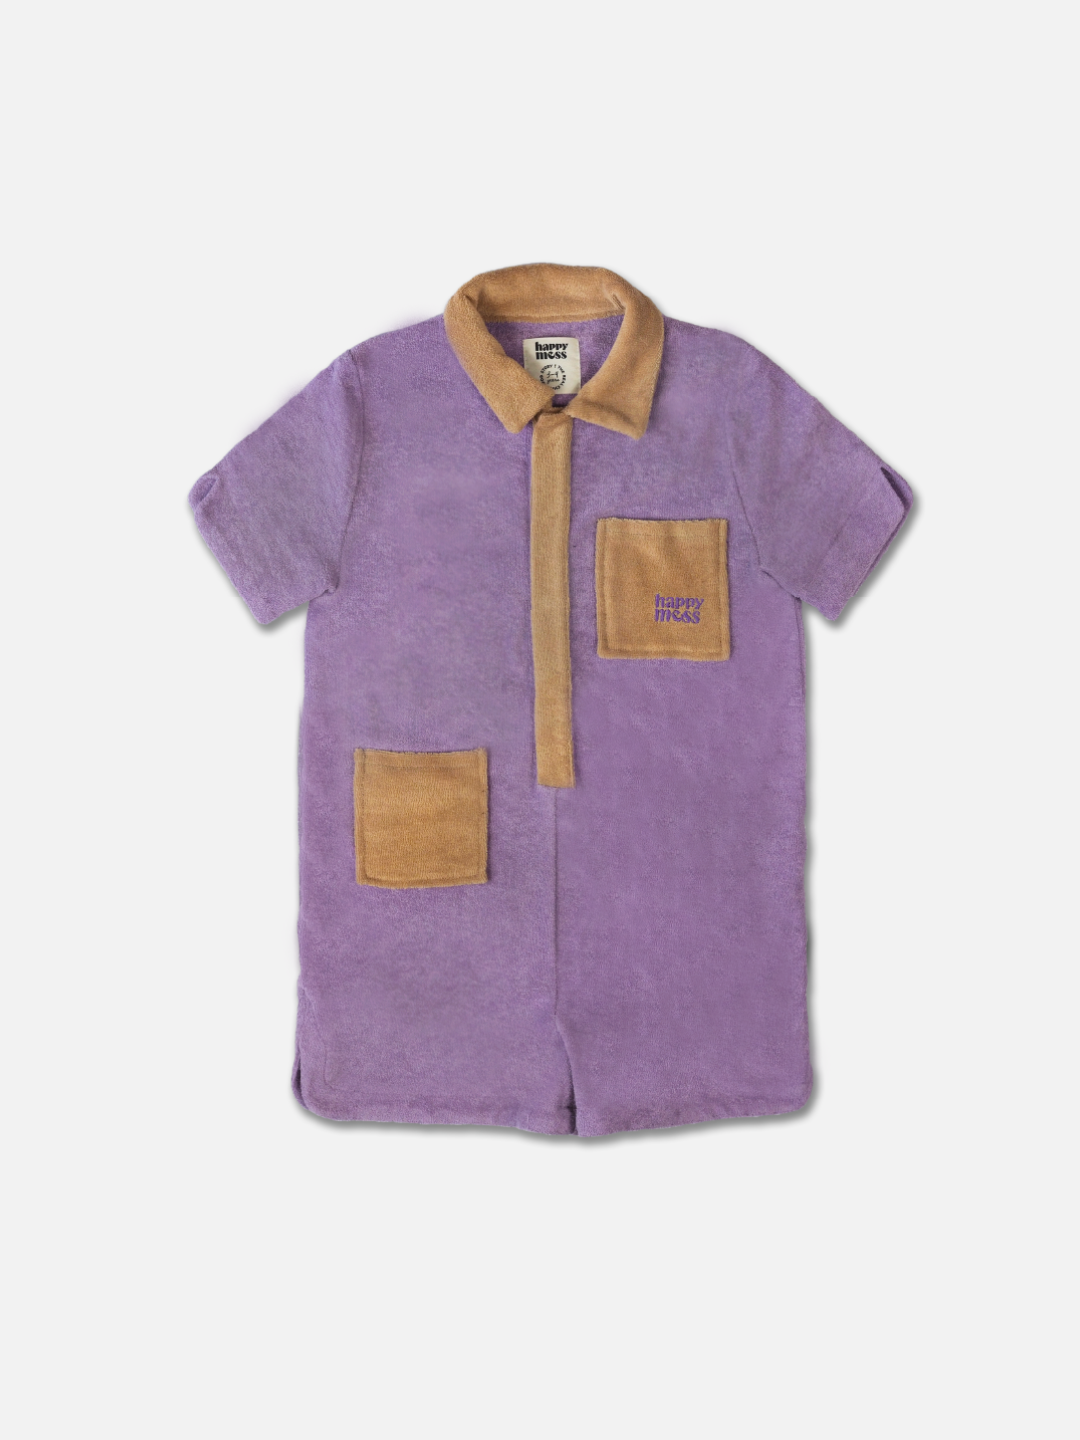 A kids' jumpsuit in pale plum with sand collar, placket and pockets